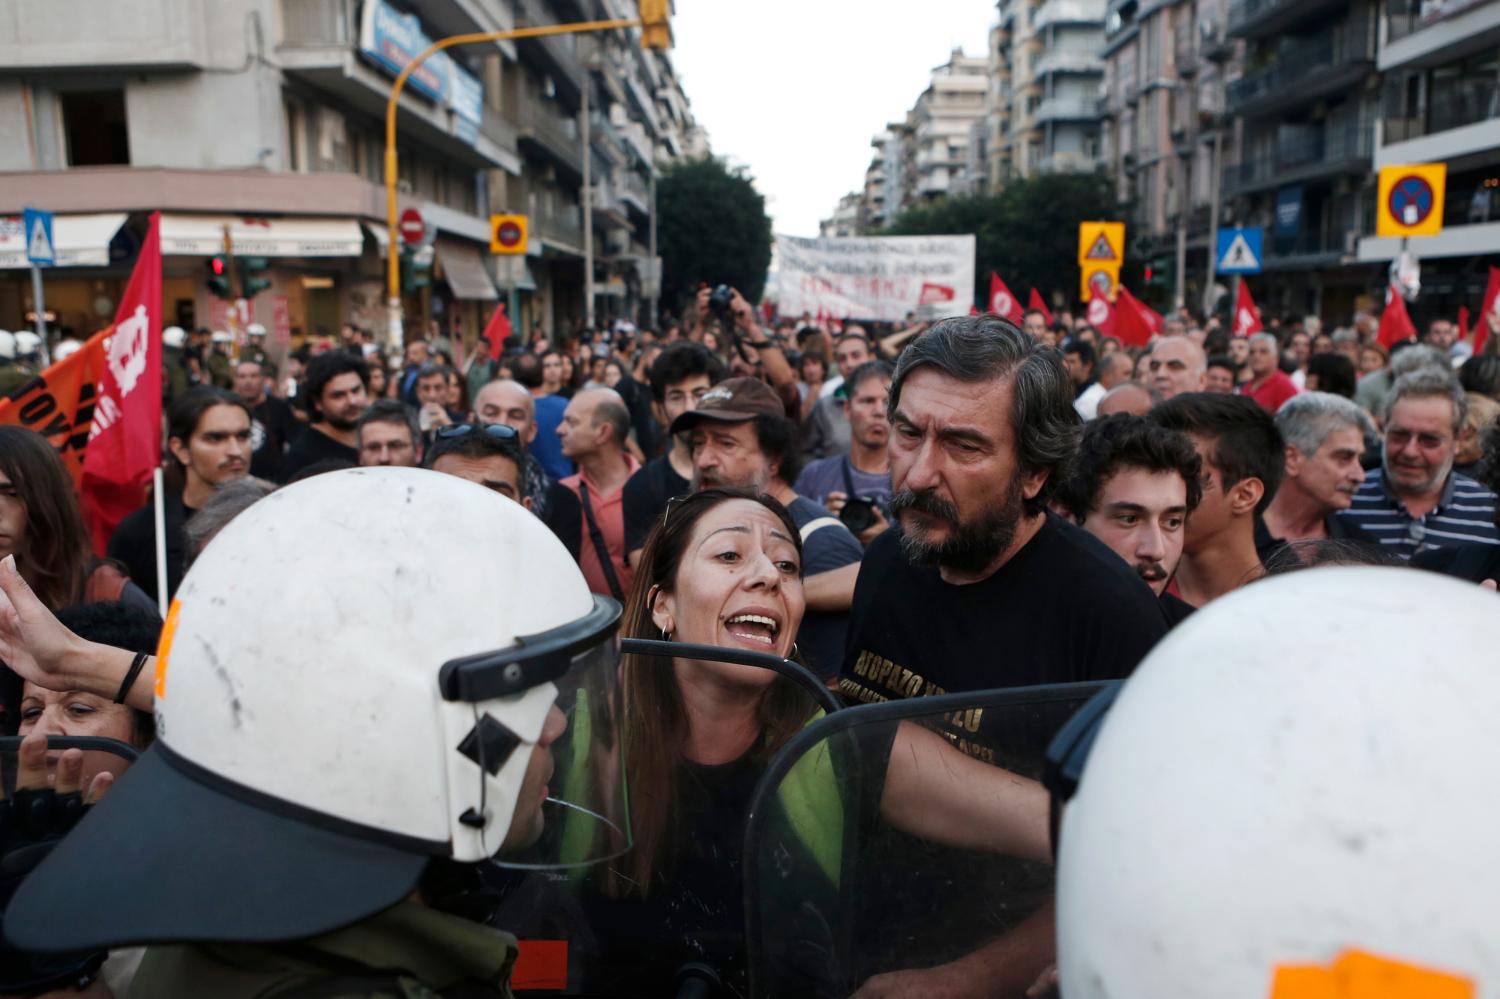 Protester during rally against austerity measures in Greece.